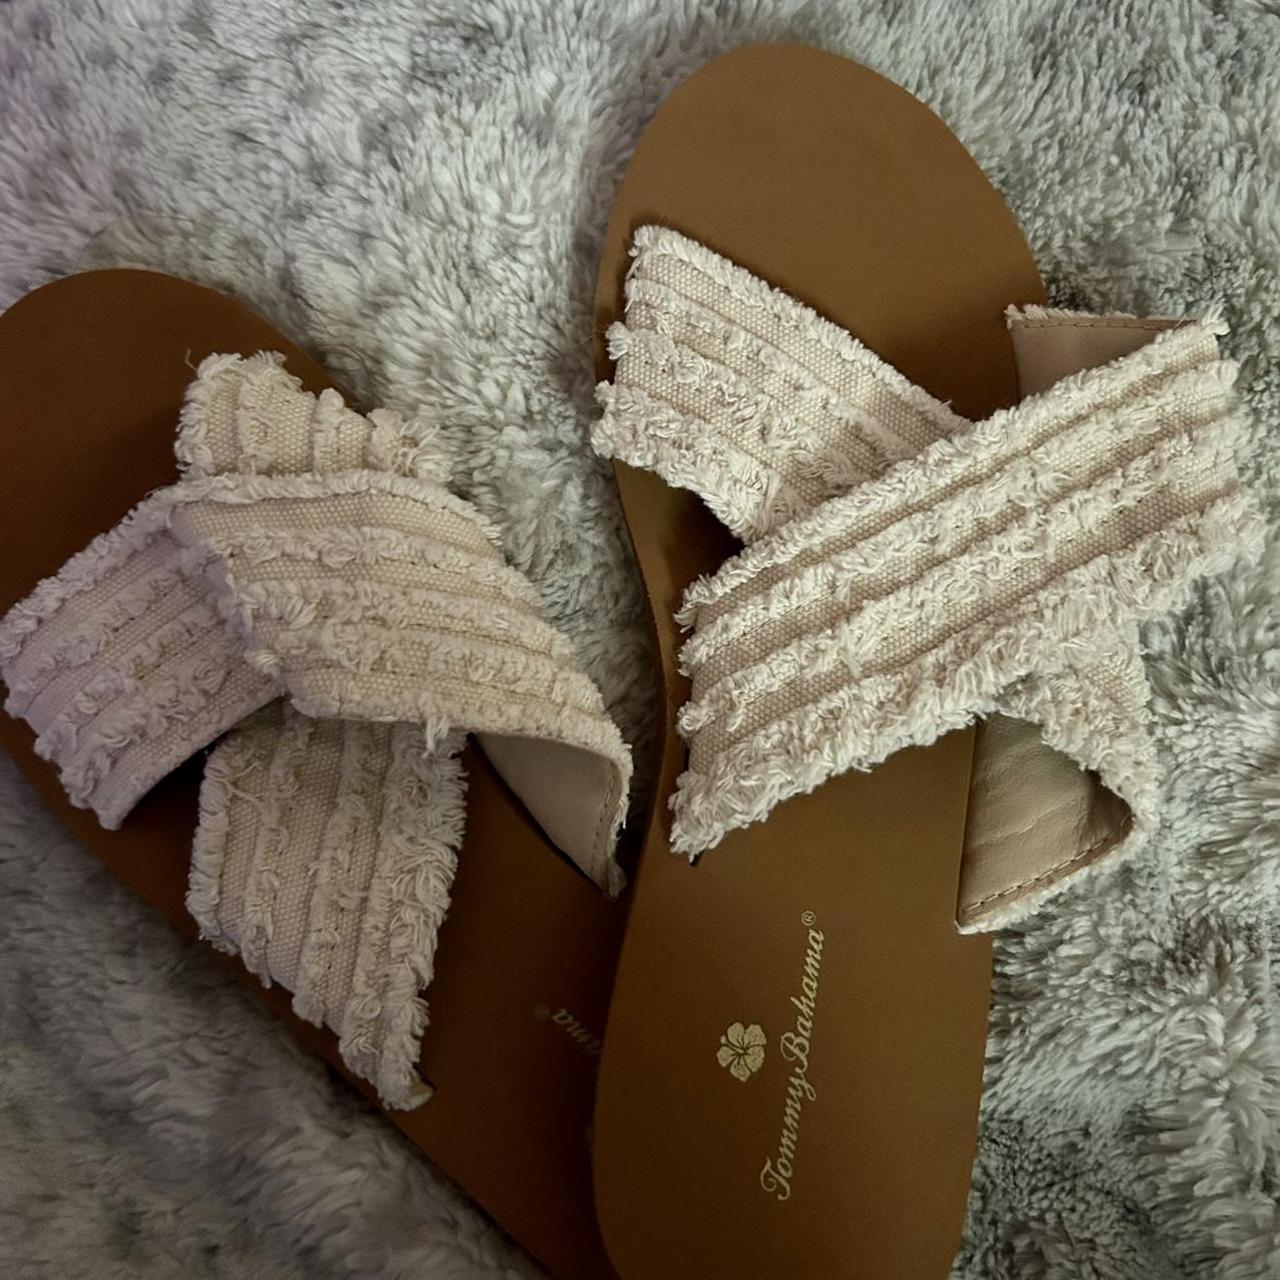 Tommy Bahama Women's Cream and Tan Sandals